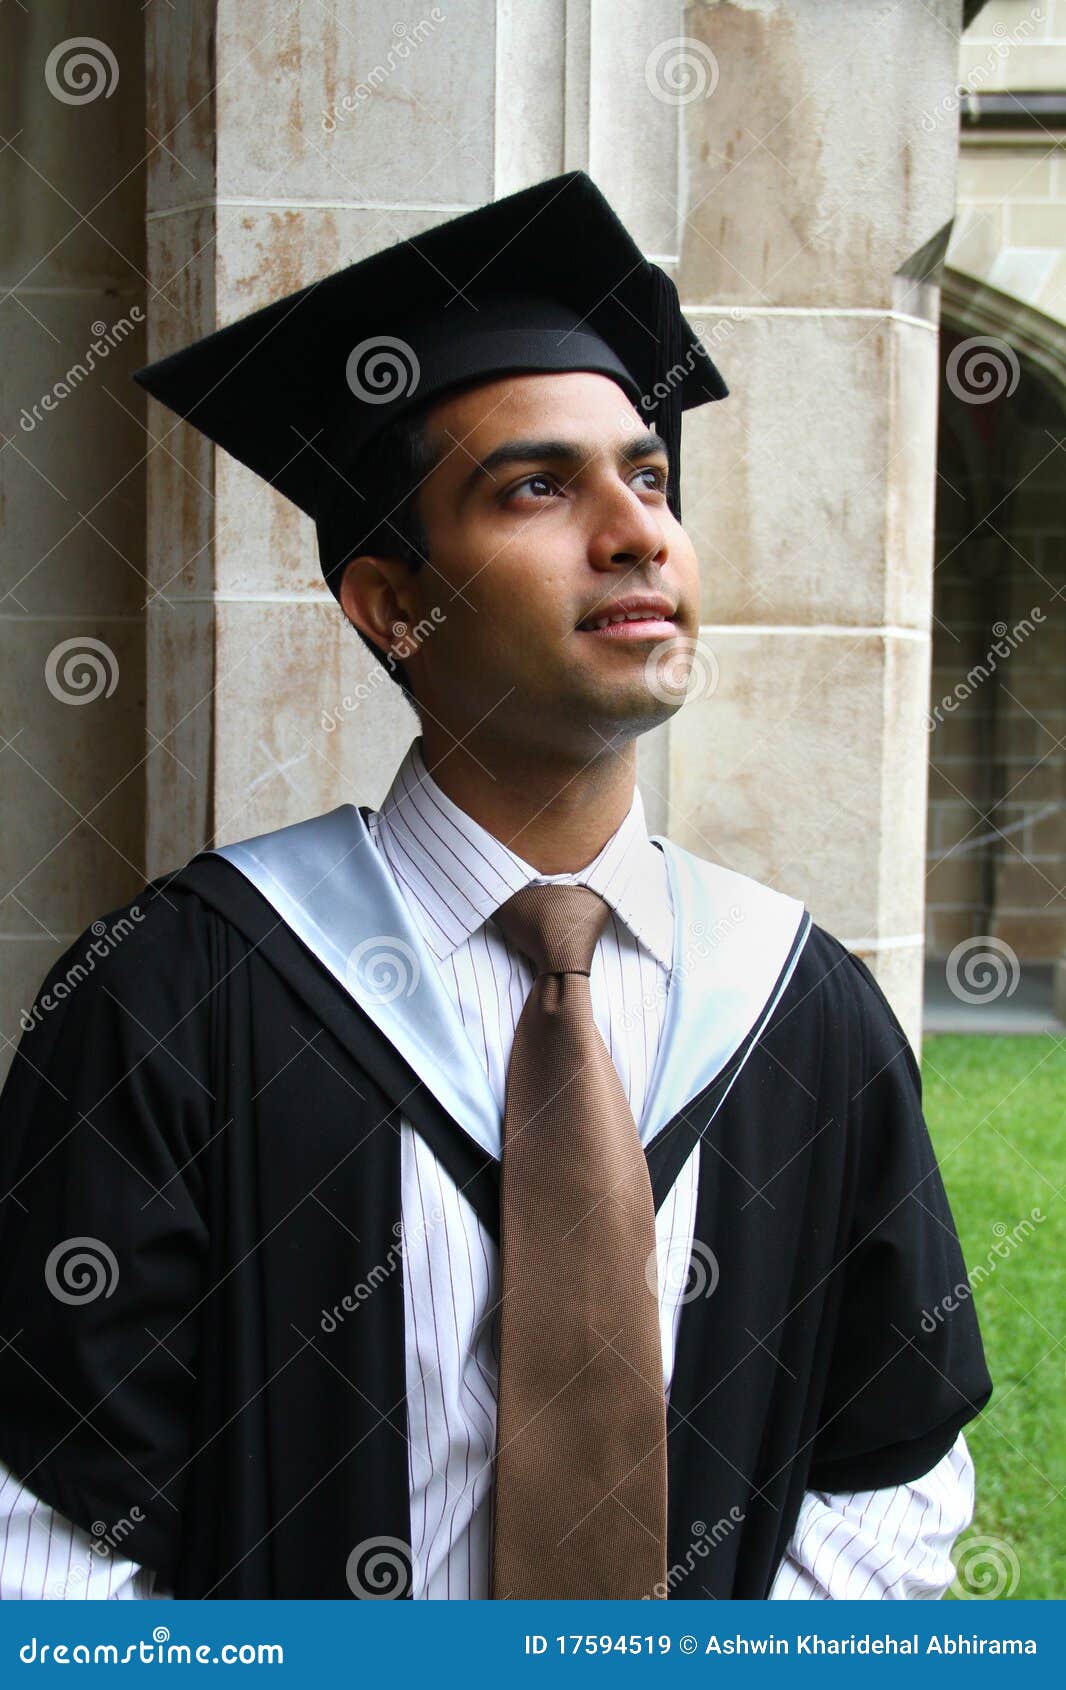 Royalty-Free photo: Man in mortarboard and academic dress showing thumbs up  sign | PickPik